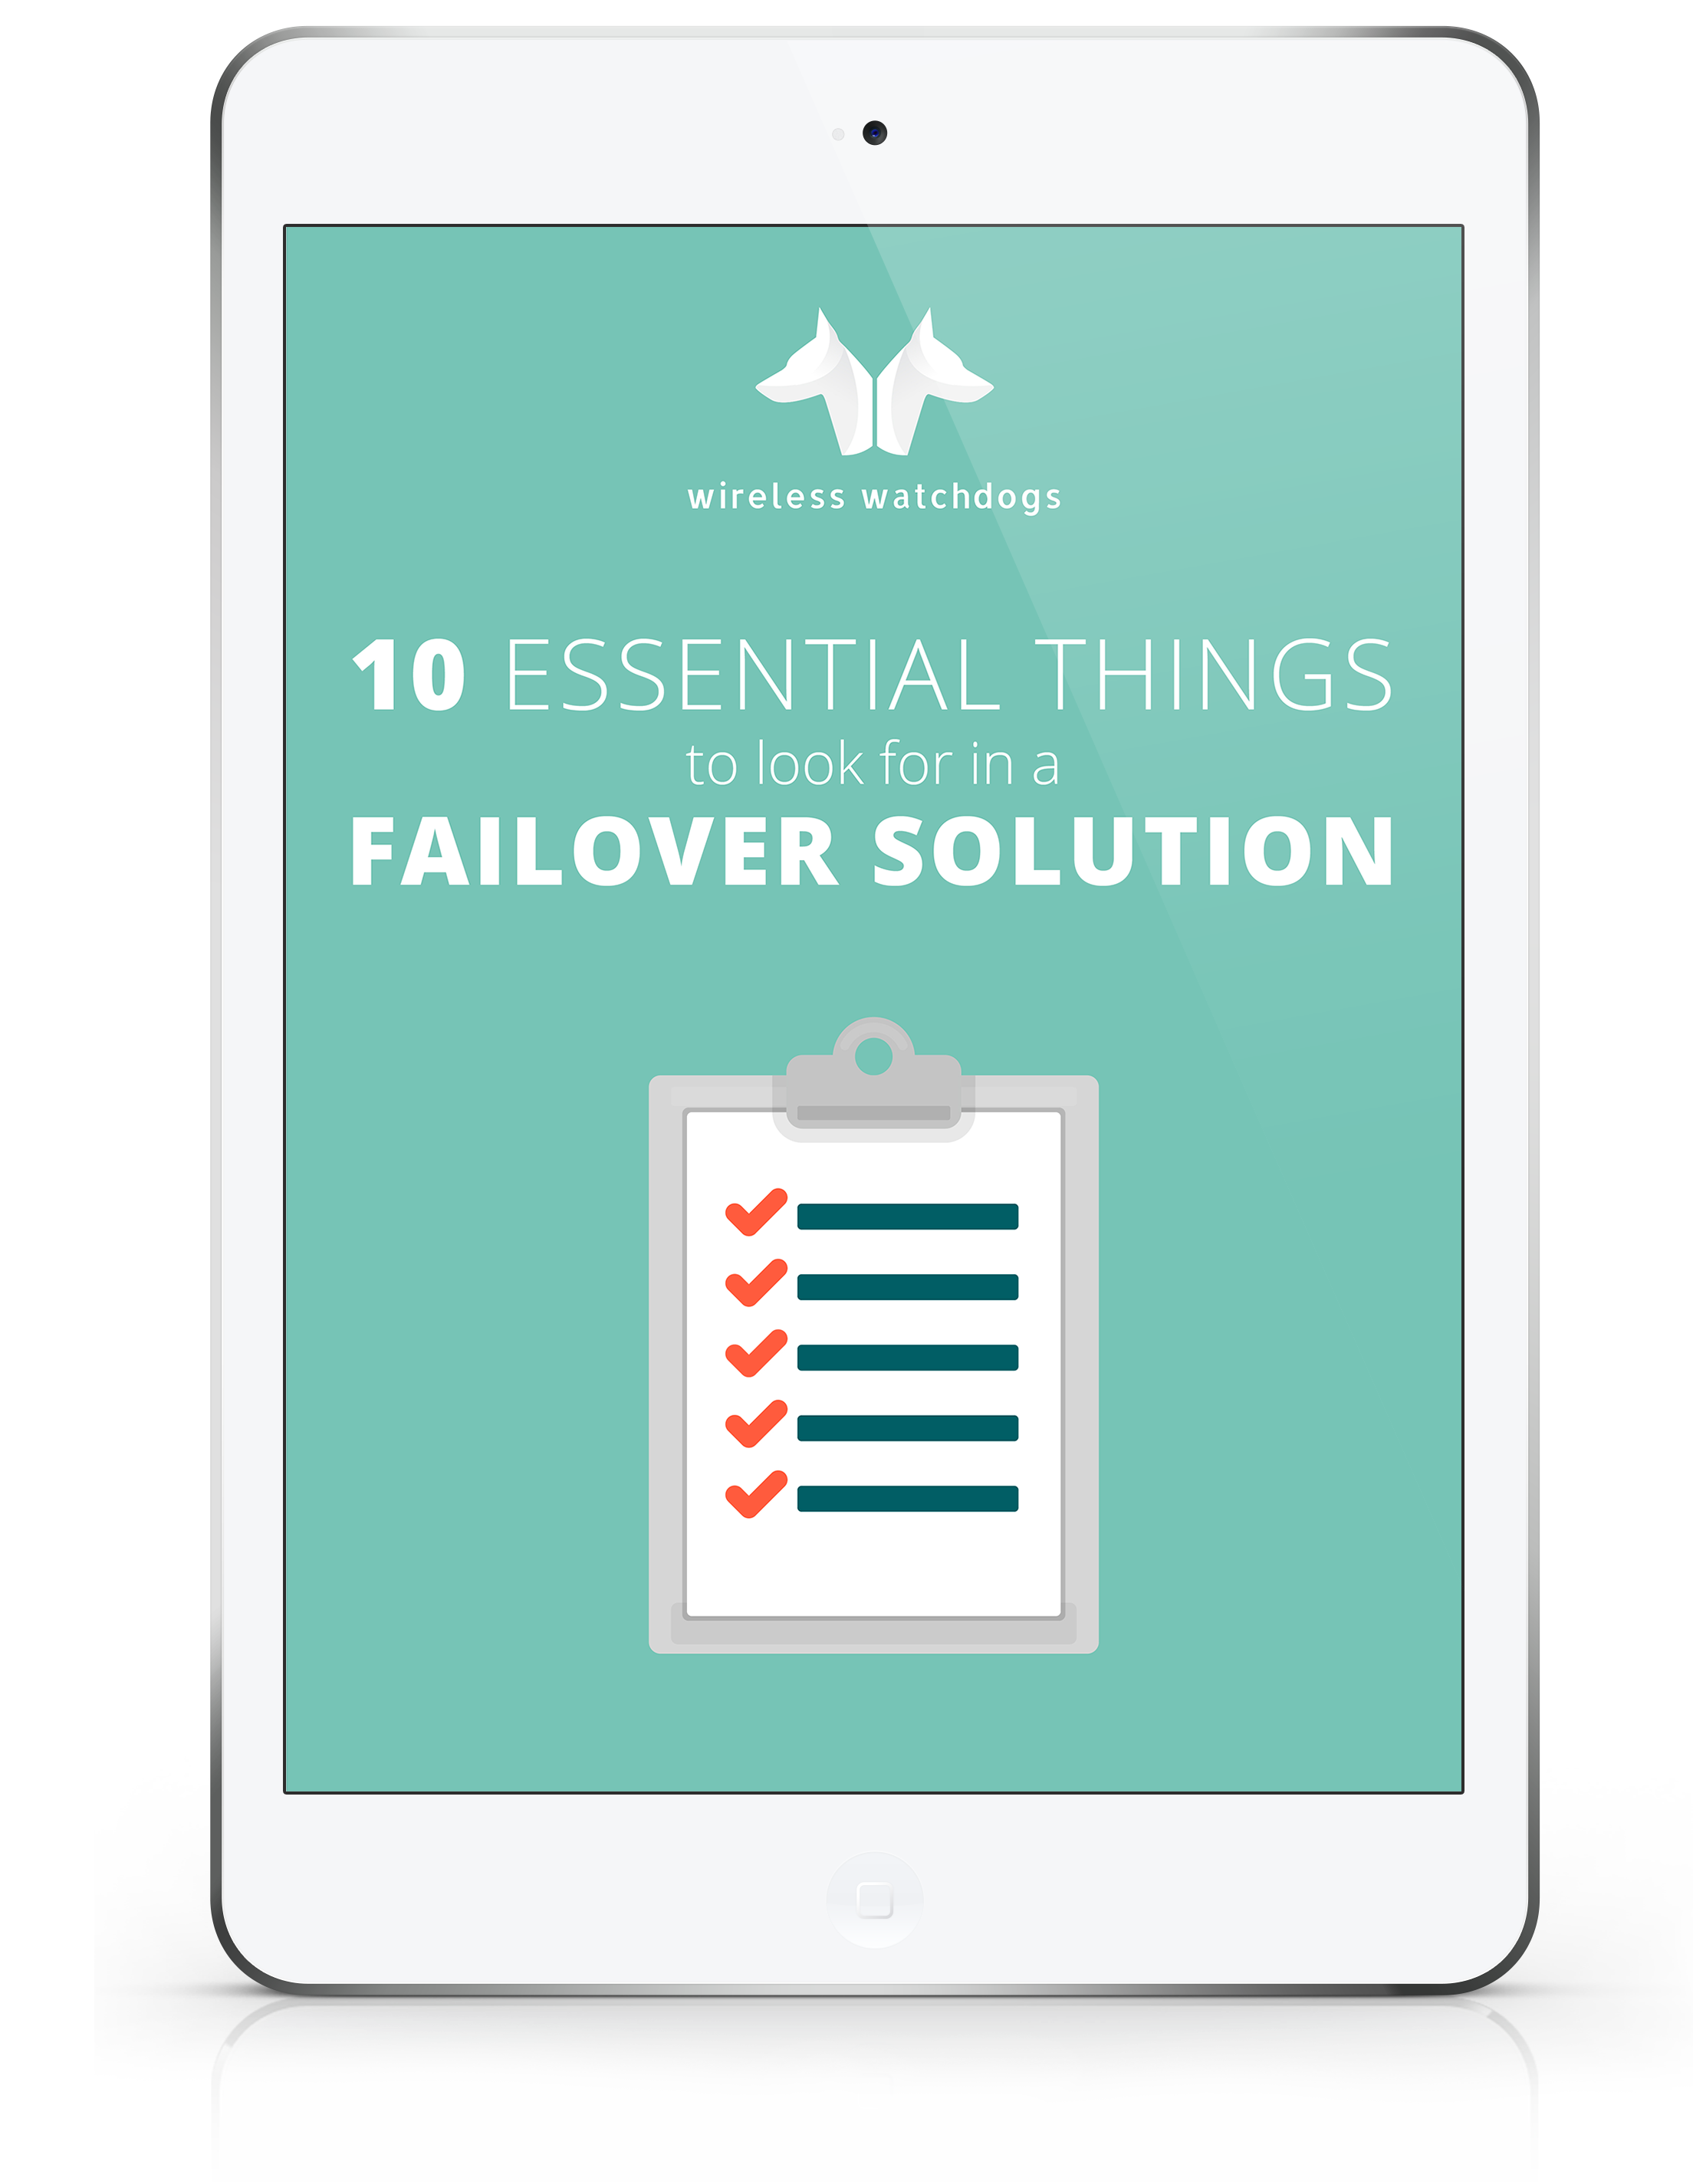 WW_Infographic_Failover_Checklist_Final-mockup.png